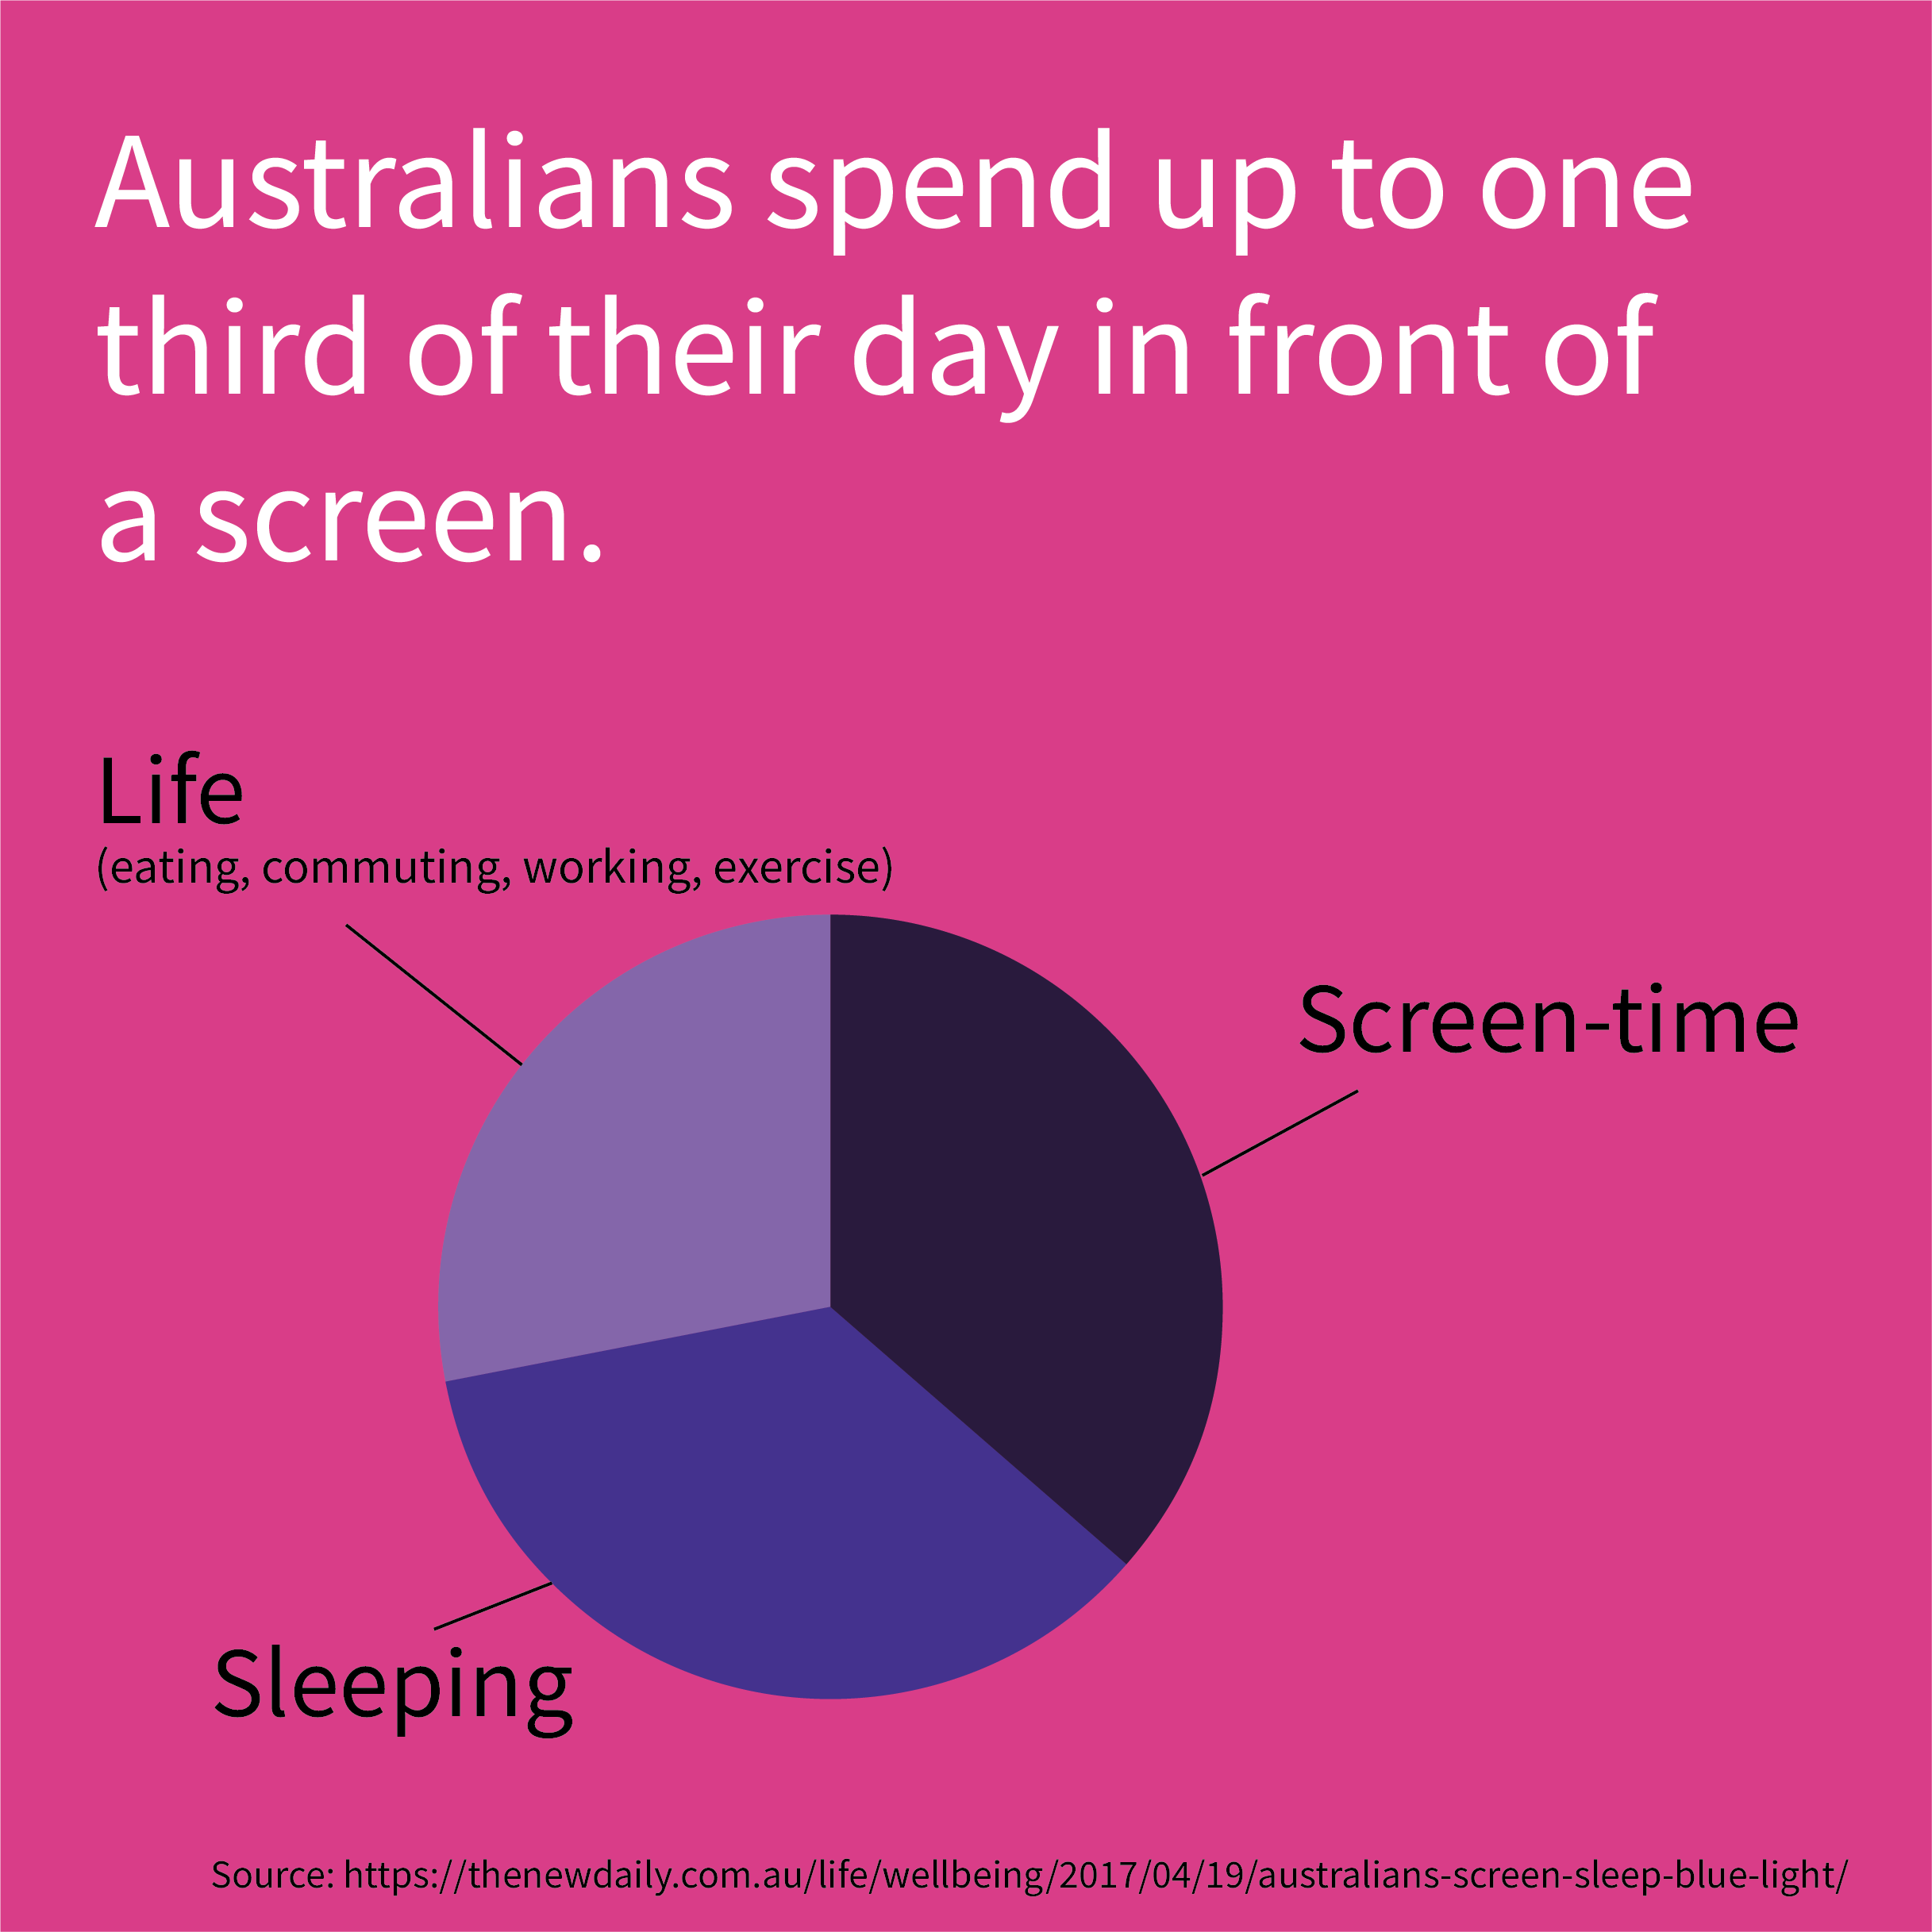 Average person spends 1/3 time on screen